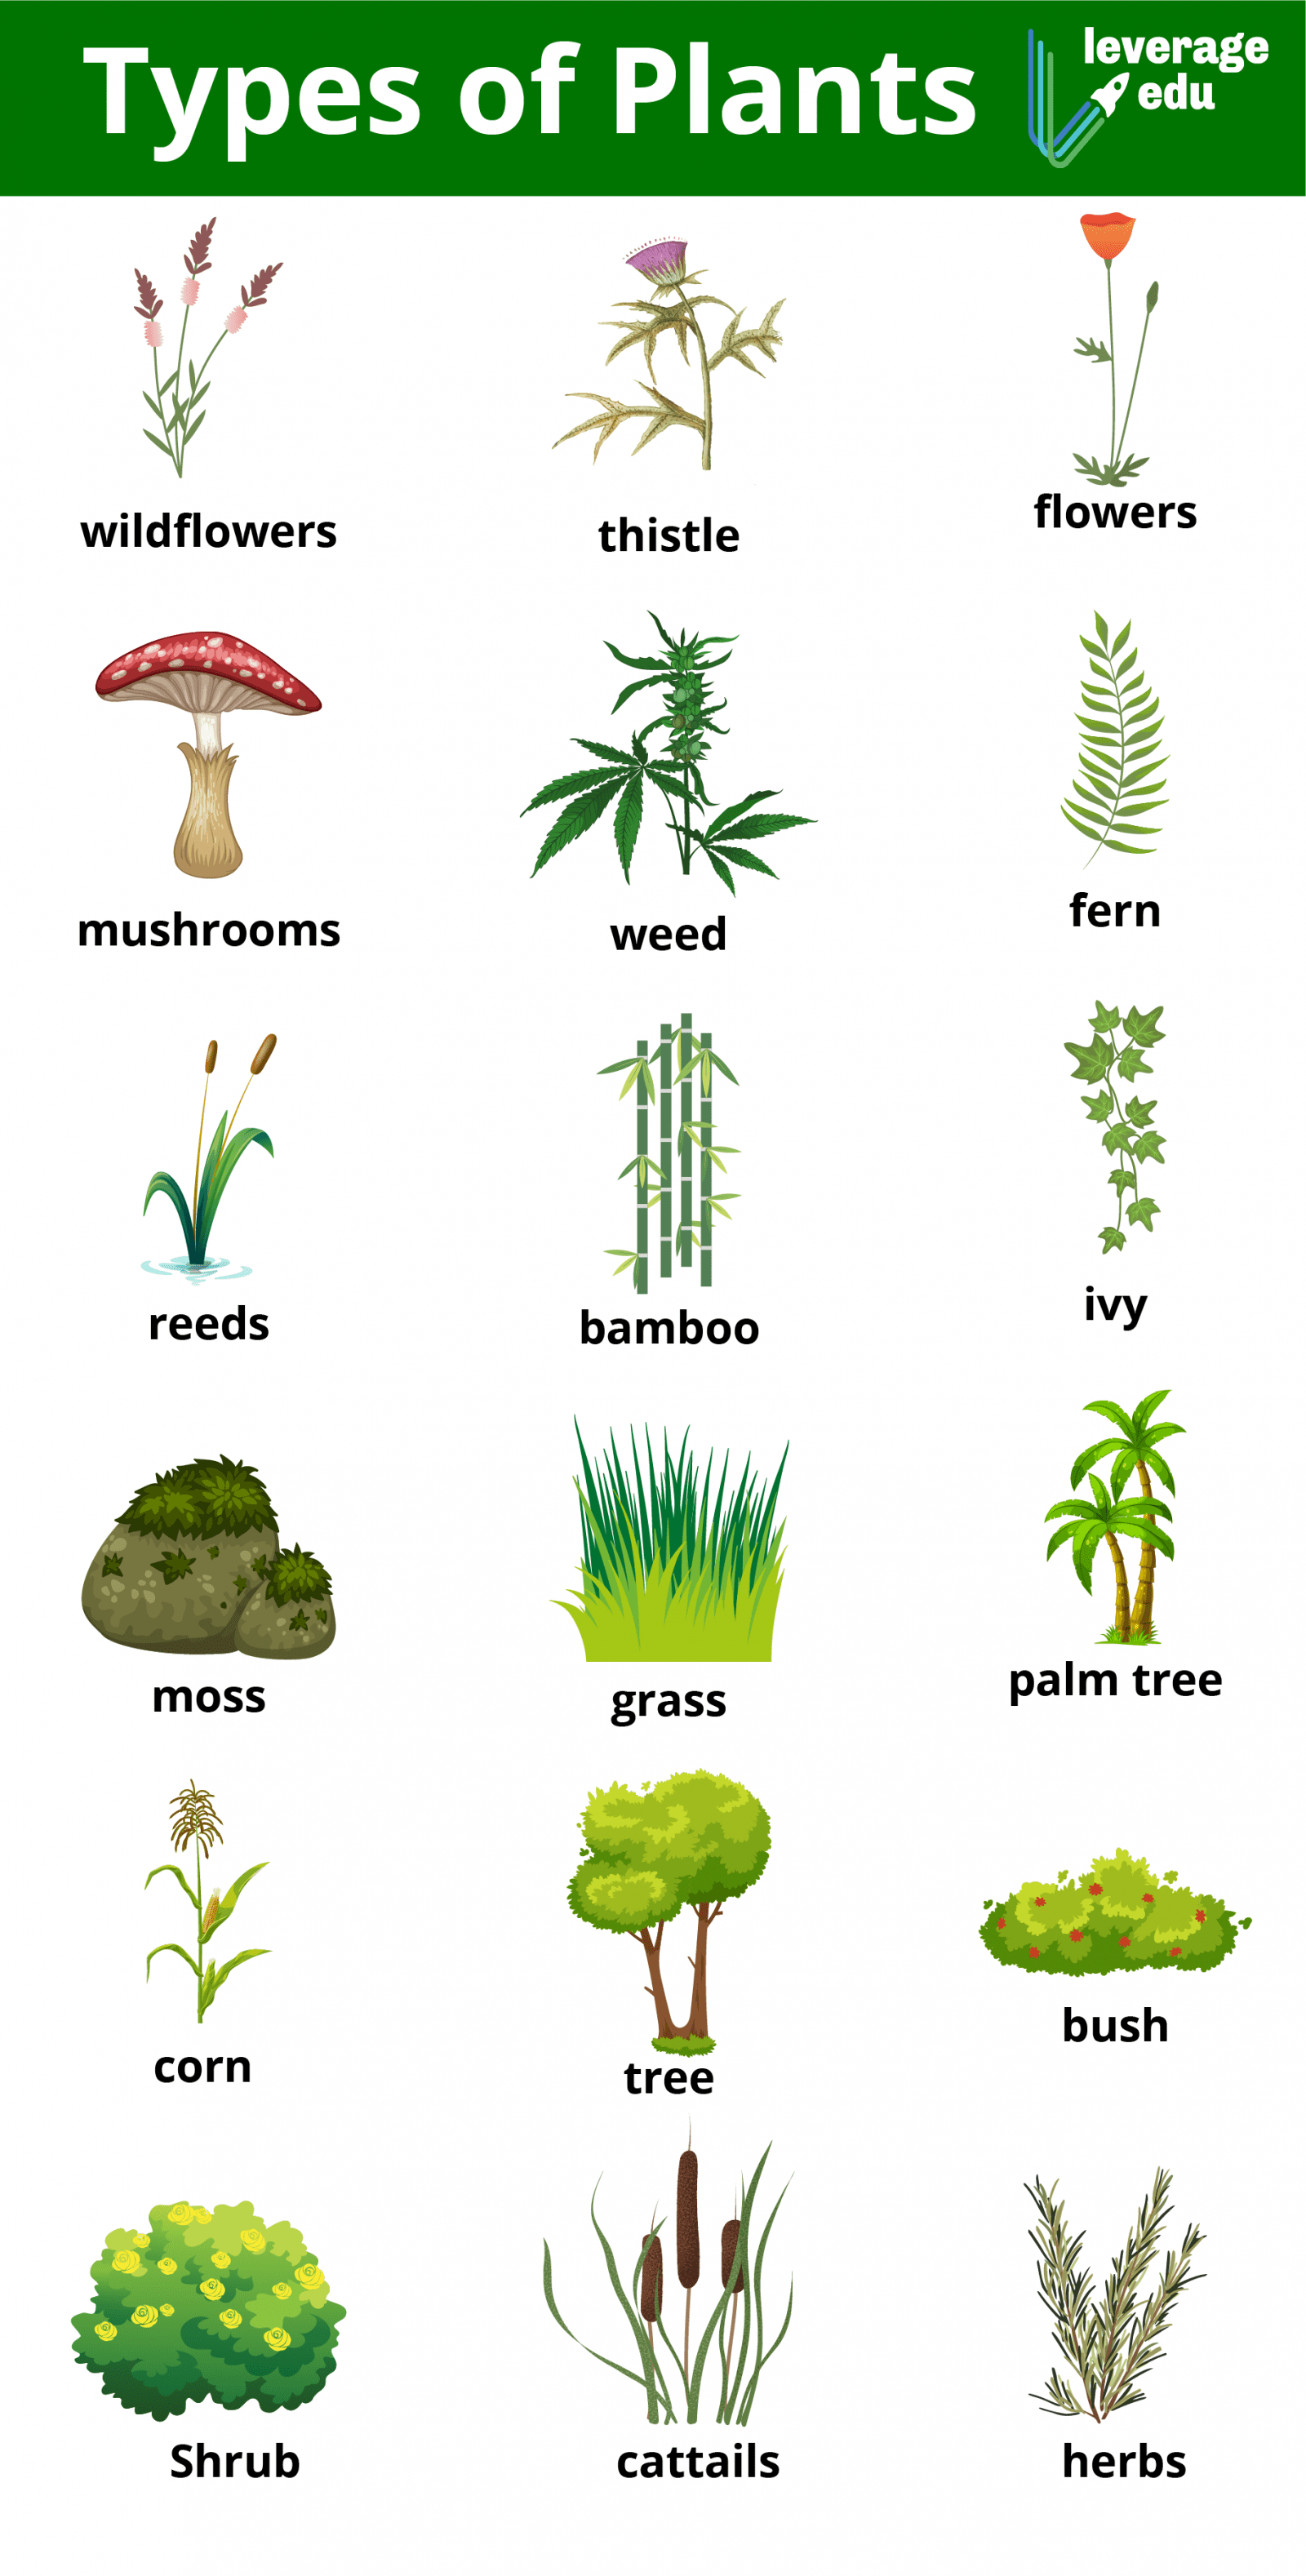 plants grow in many different shapes and sizes